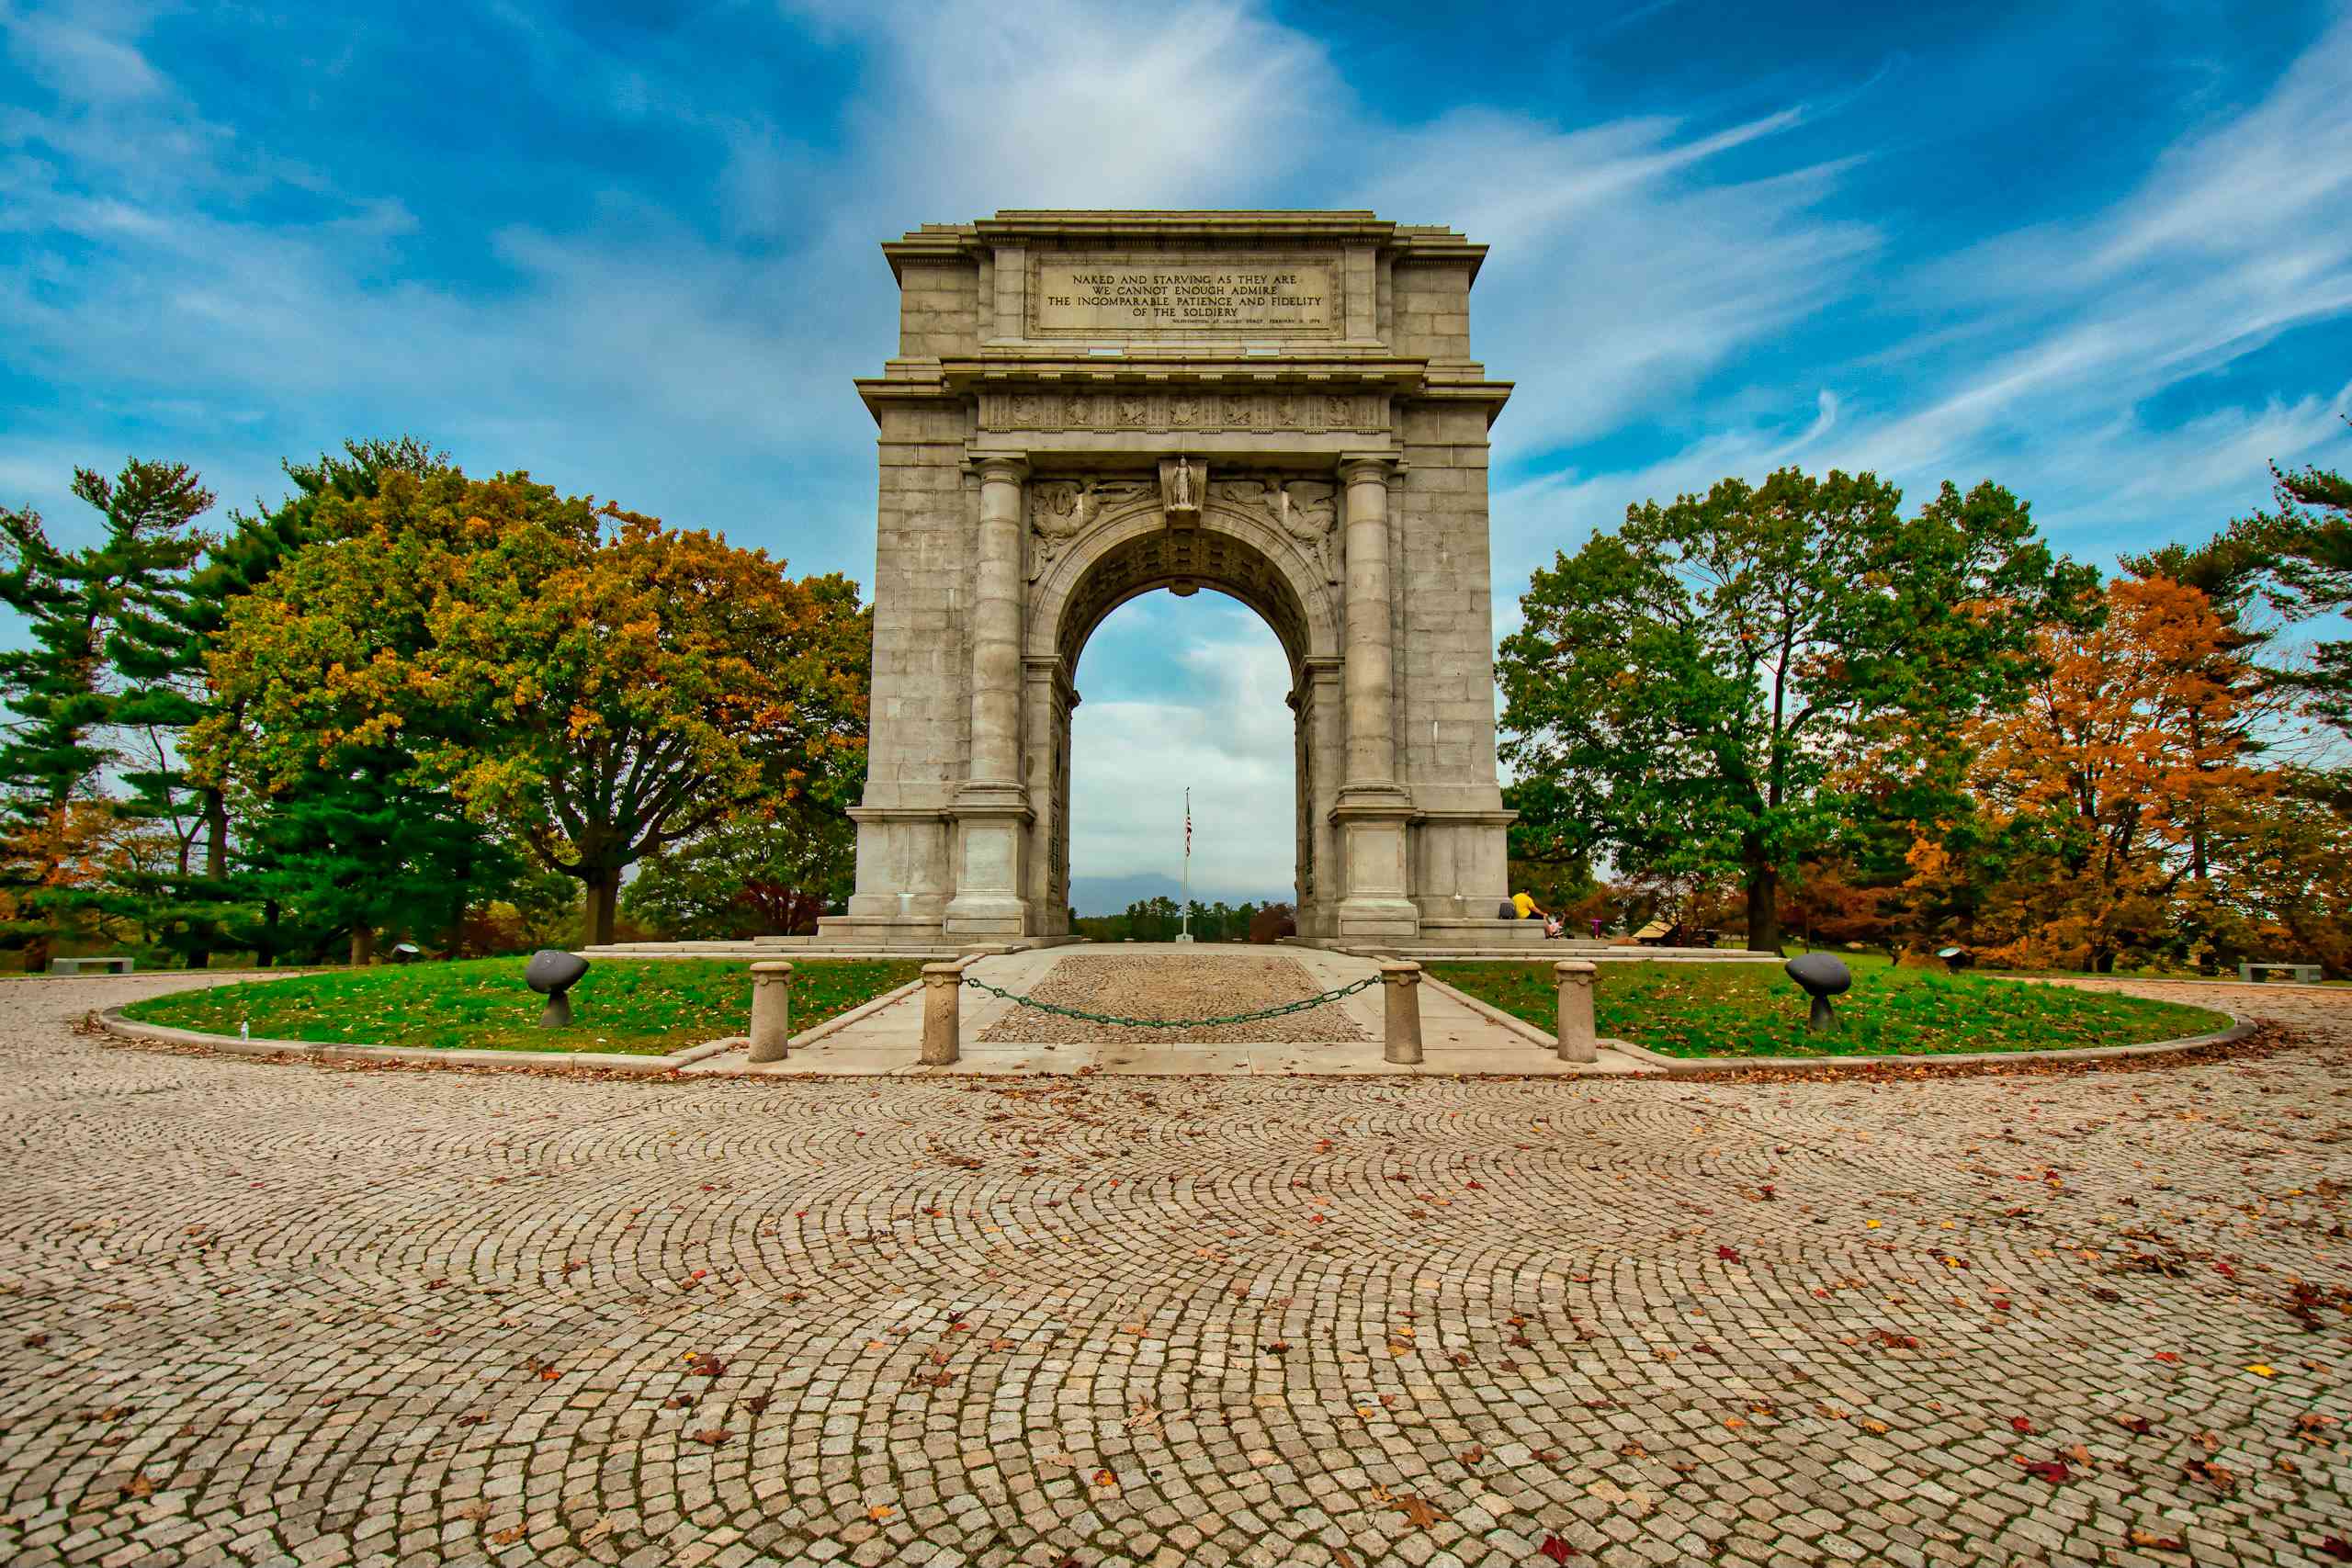 What Does The George Washington Monument at Valley Forge Commemorate?